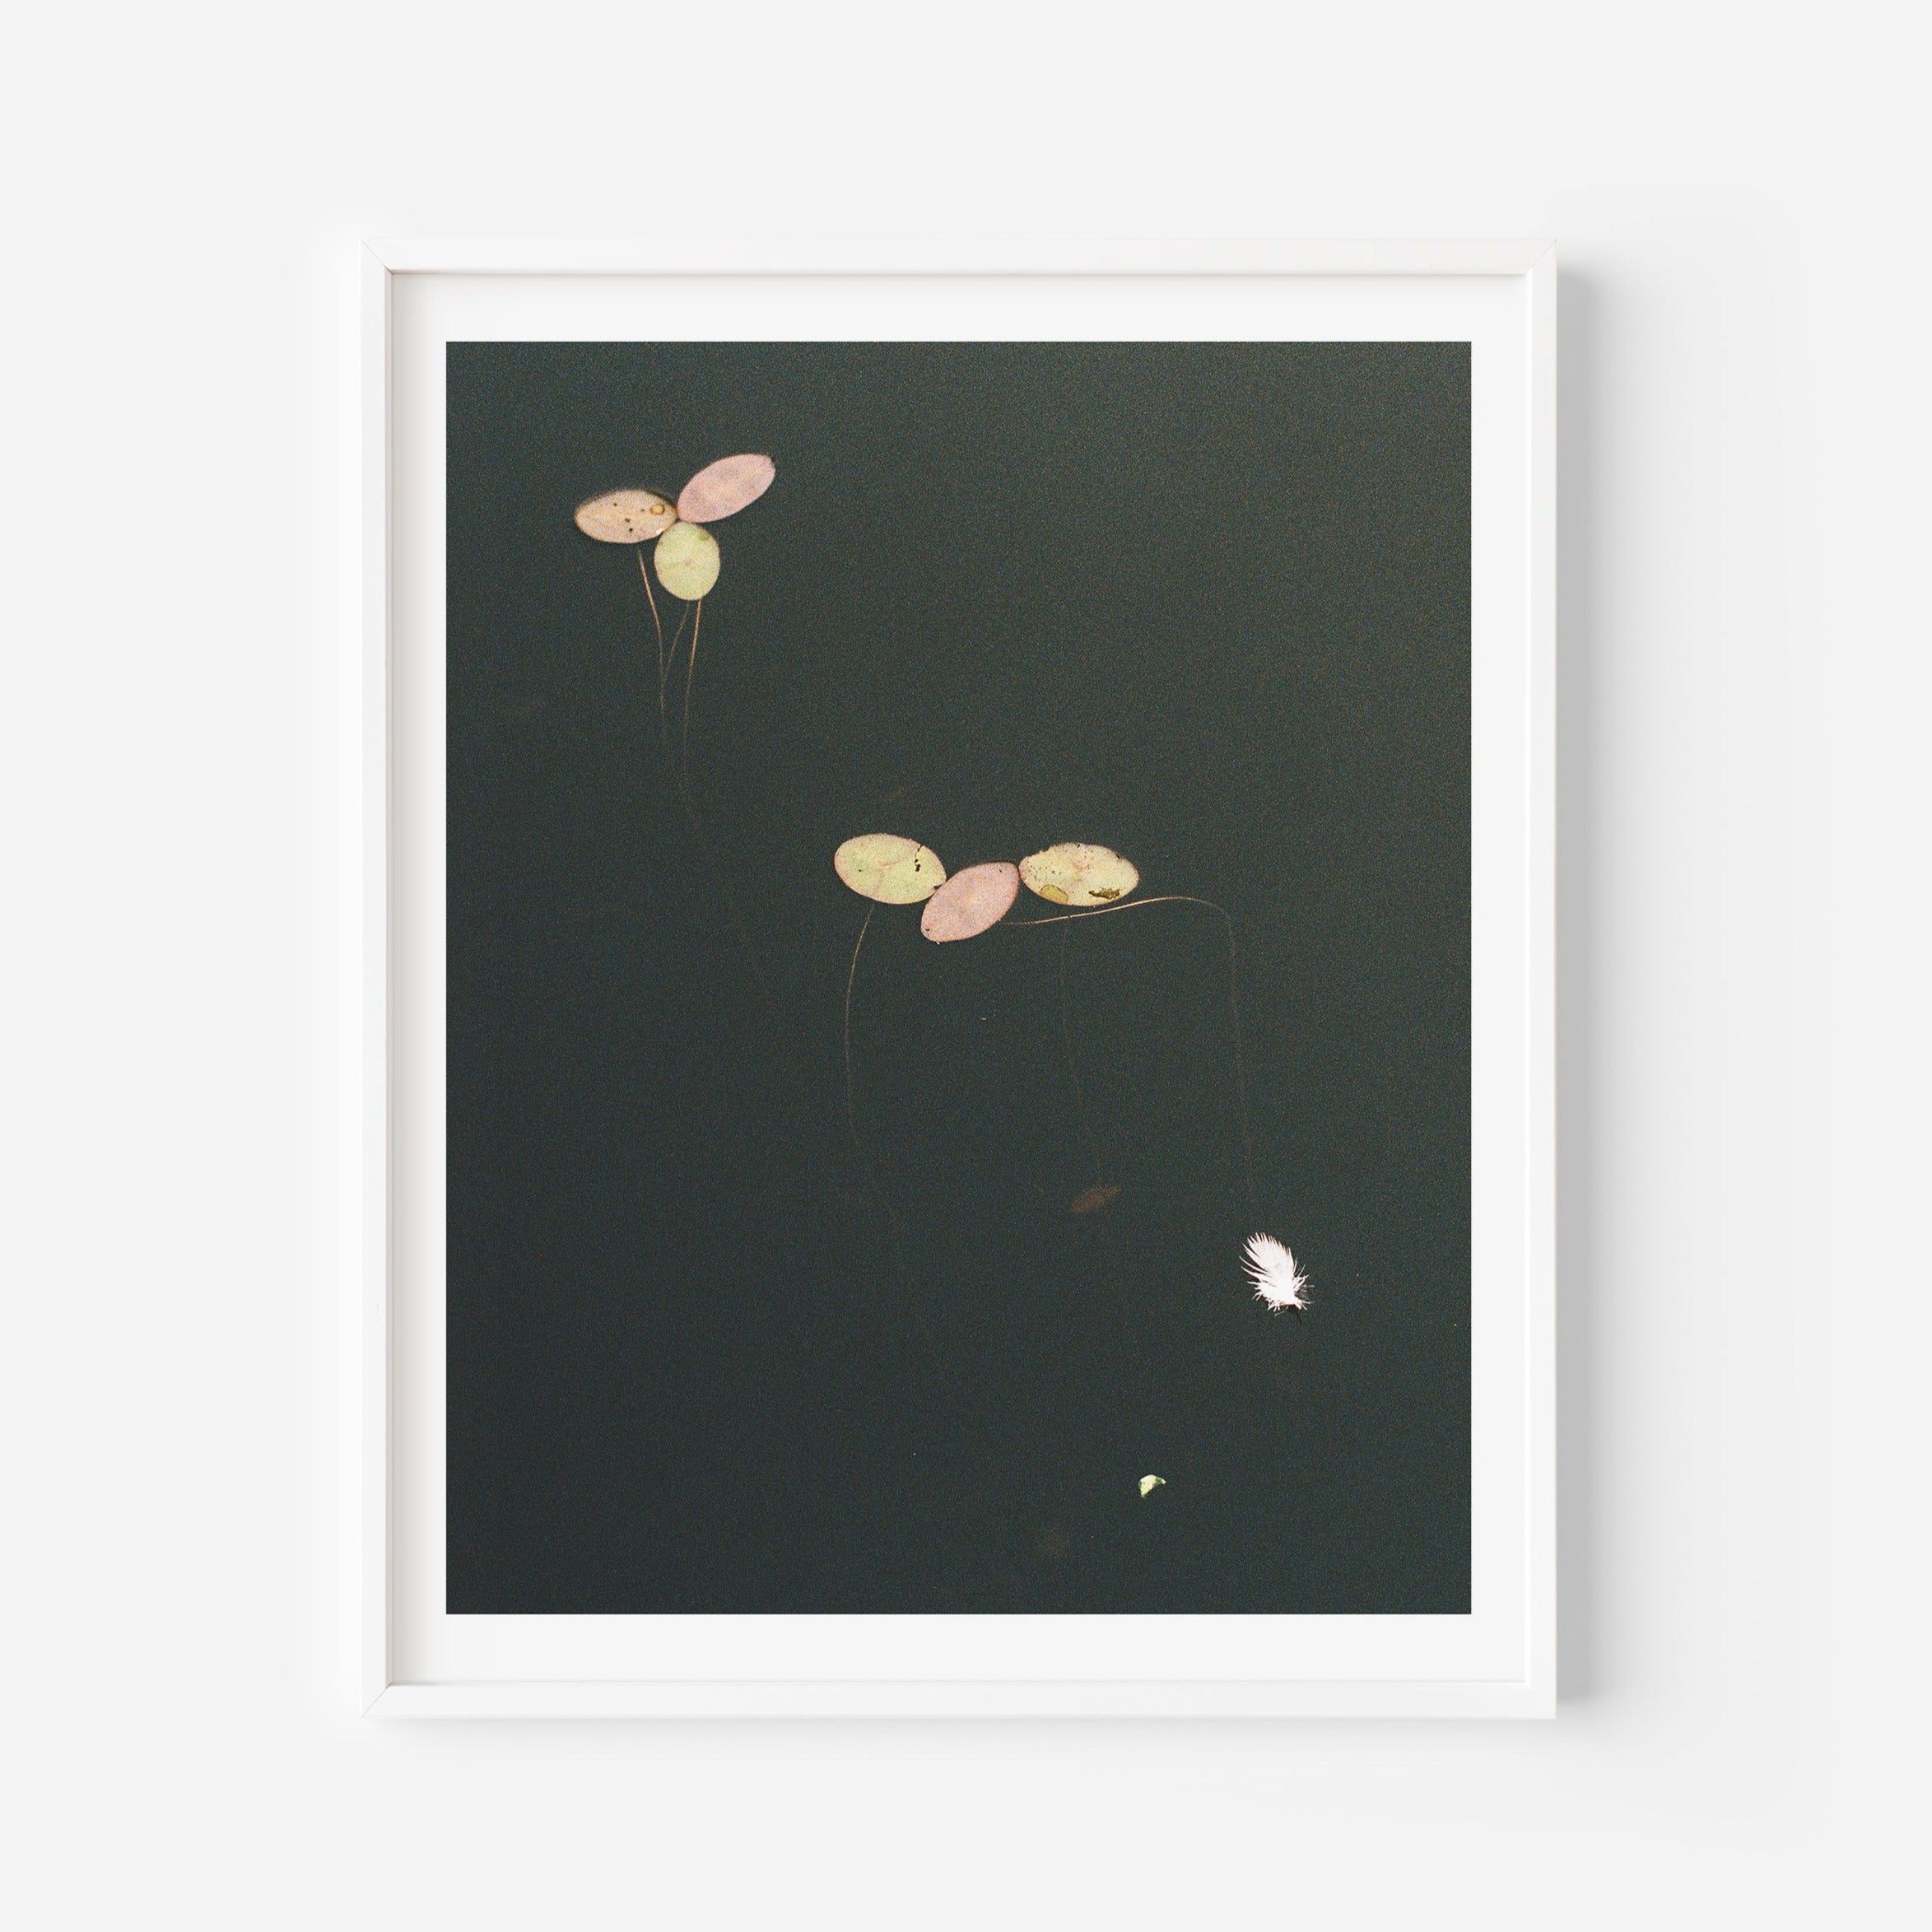 Abysses - Affiche 8 x 10